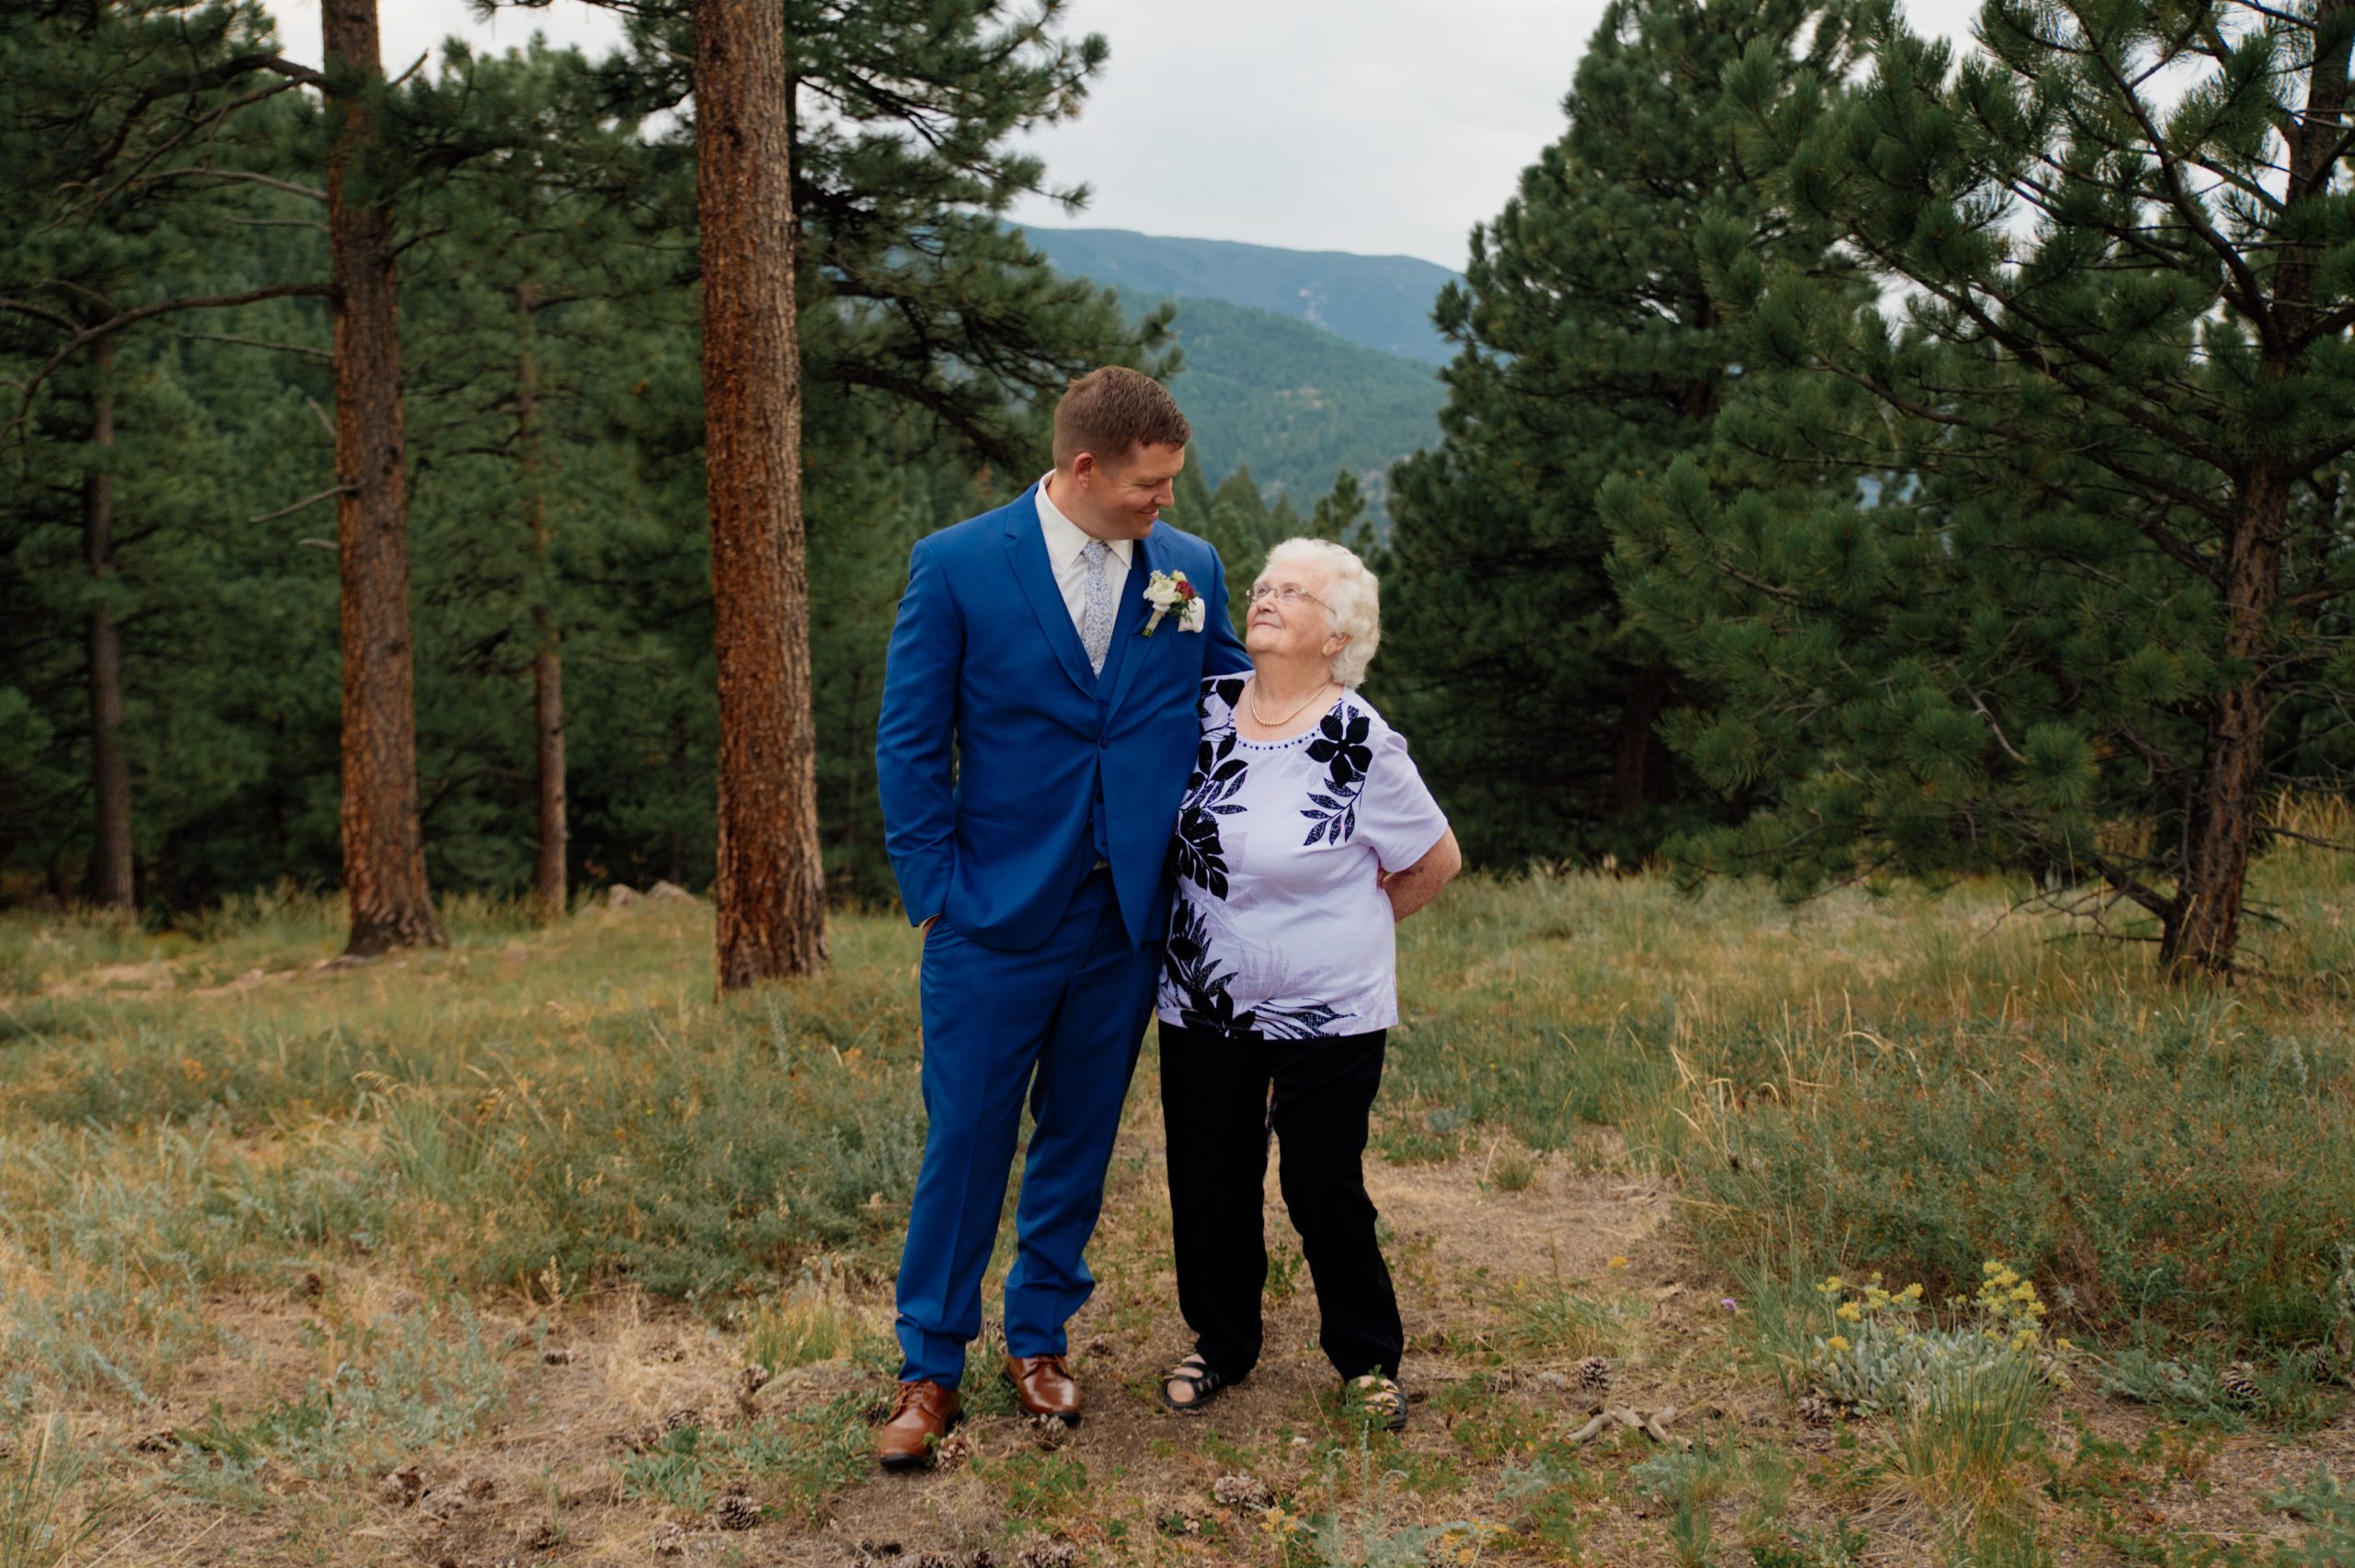 The groom and his sweet 91 year old grandma standing side-by-side and smiling at each other after the grooms artist point elopement. 